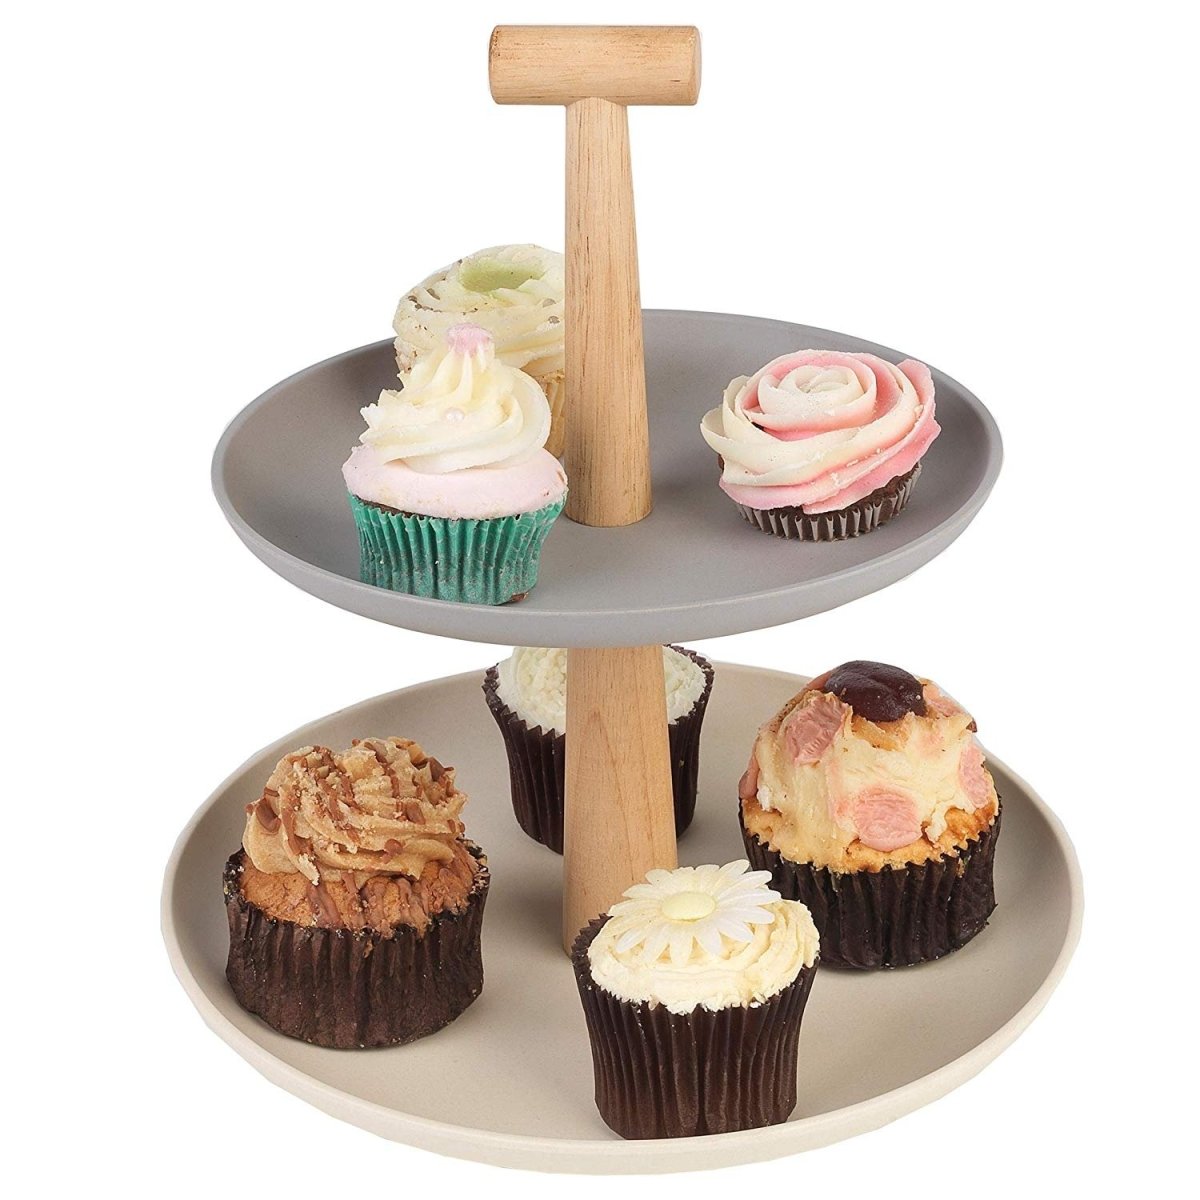 Salter Earth Bamboo 2-Tier Cake Stand - Bonnypack